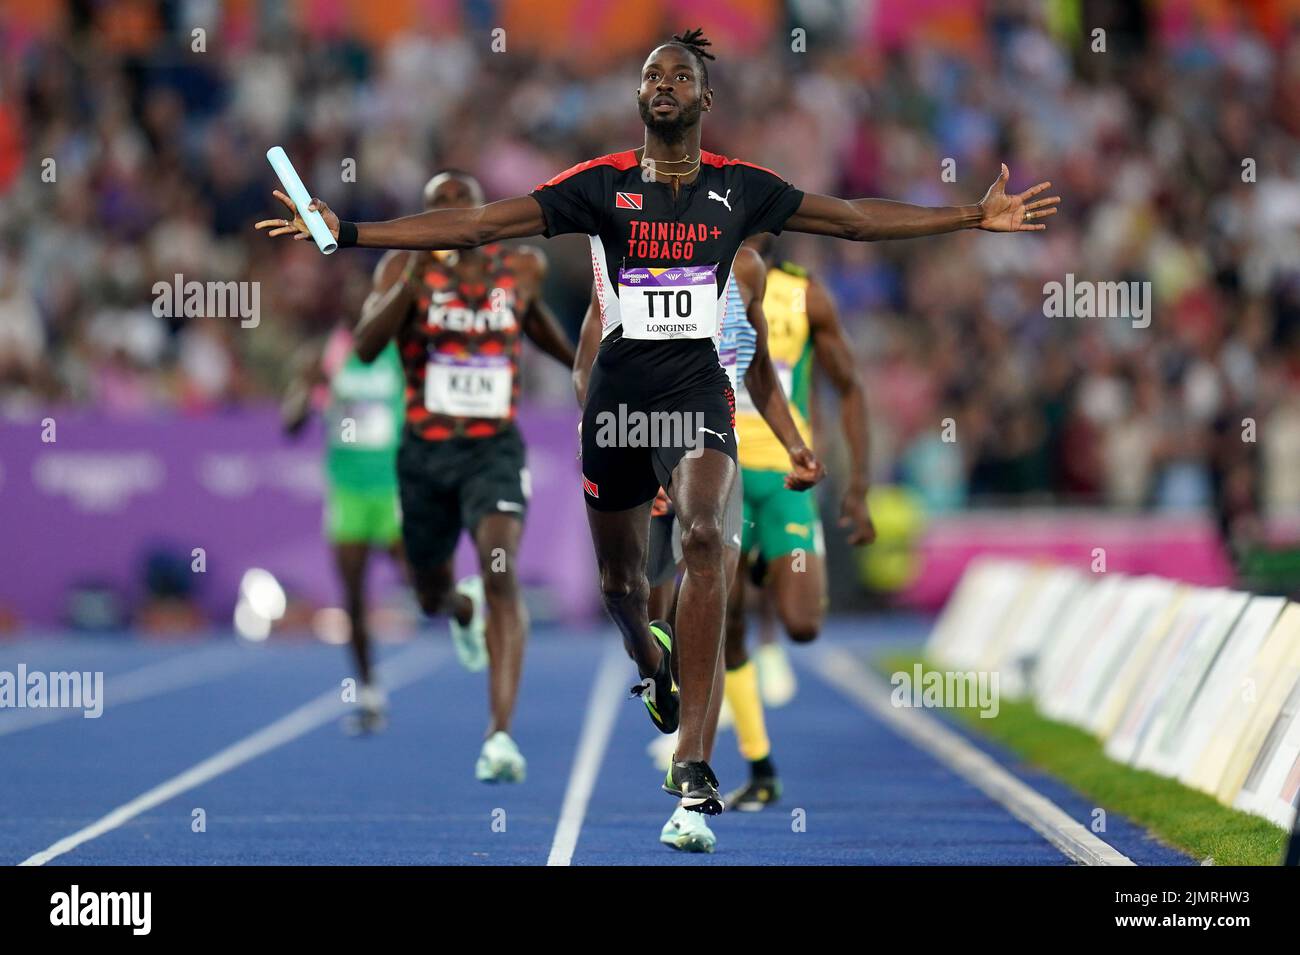 Trinidad and Tobago’s Kashief King celebrates after winning the Men’s 4 x 400m Relay Final at Alexander Stadium on day ten of the 2022 Commonwealth Games in Birmingham. Picture date: Sunday August 7, 2022. Stock Photo